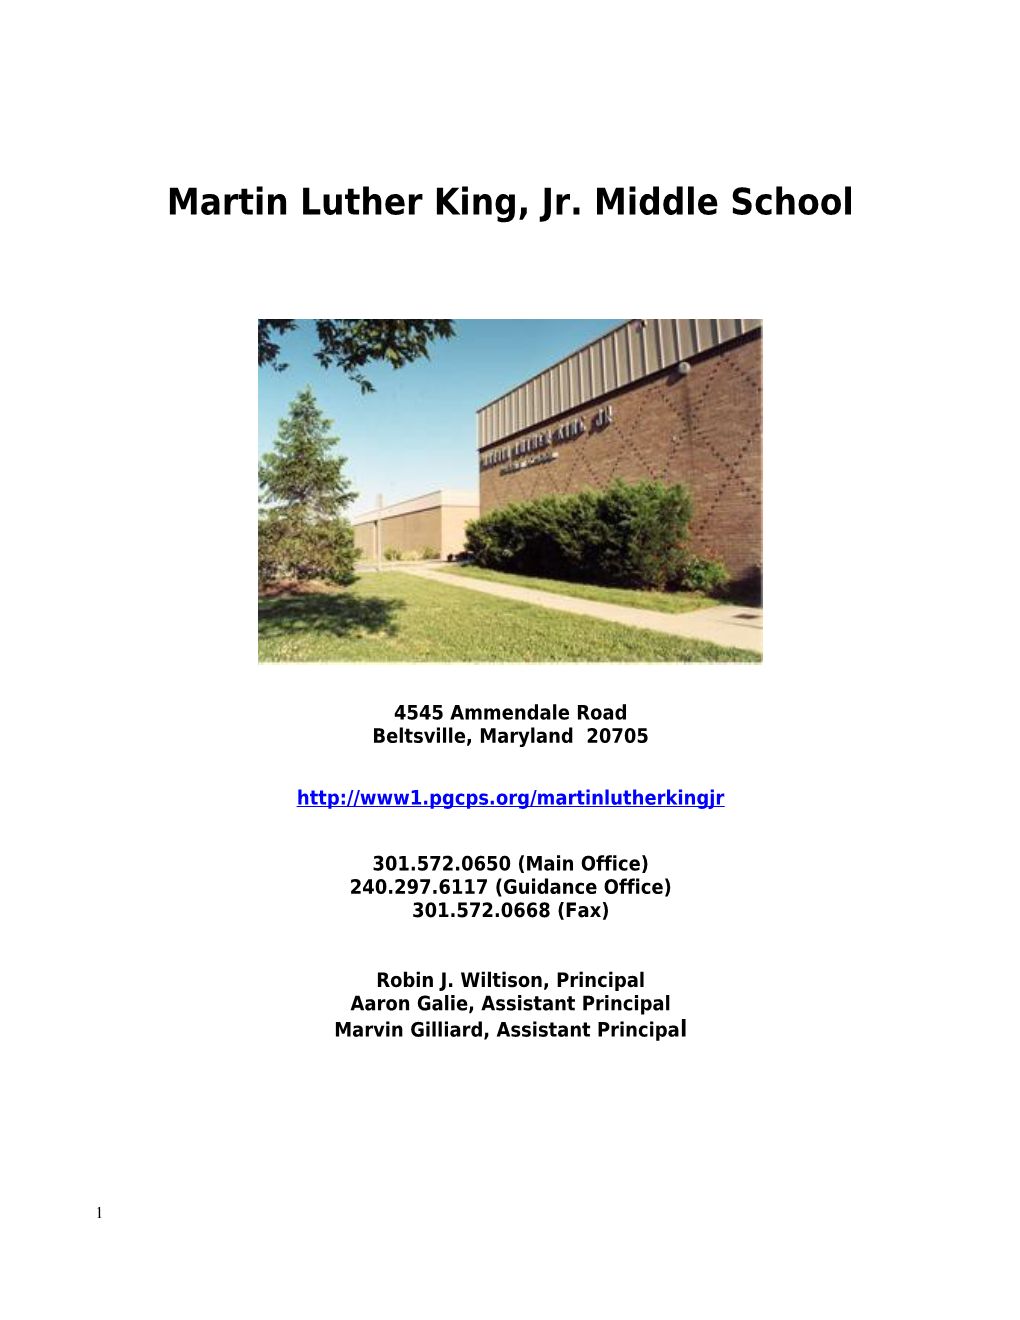 Martin Luther King, Jr. Middle School